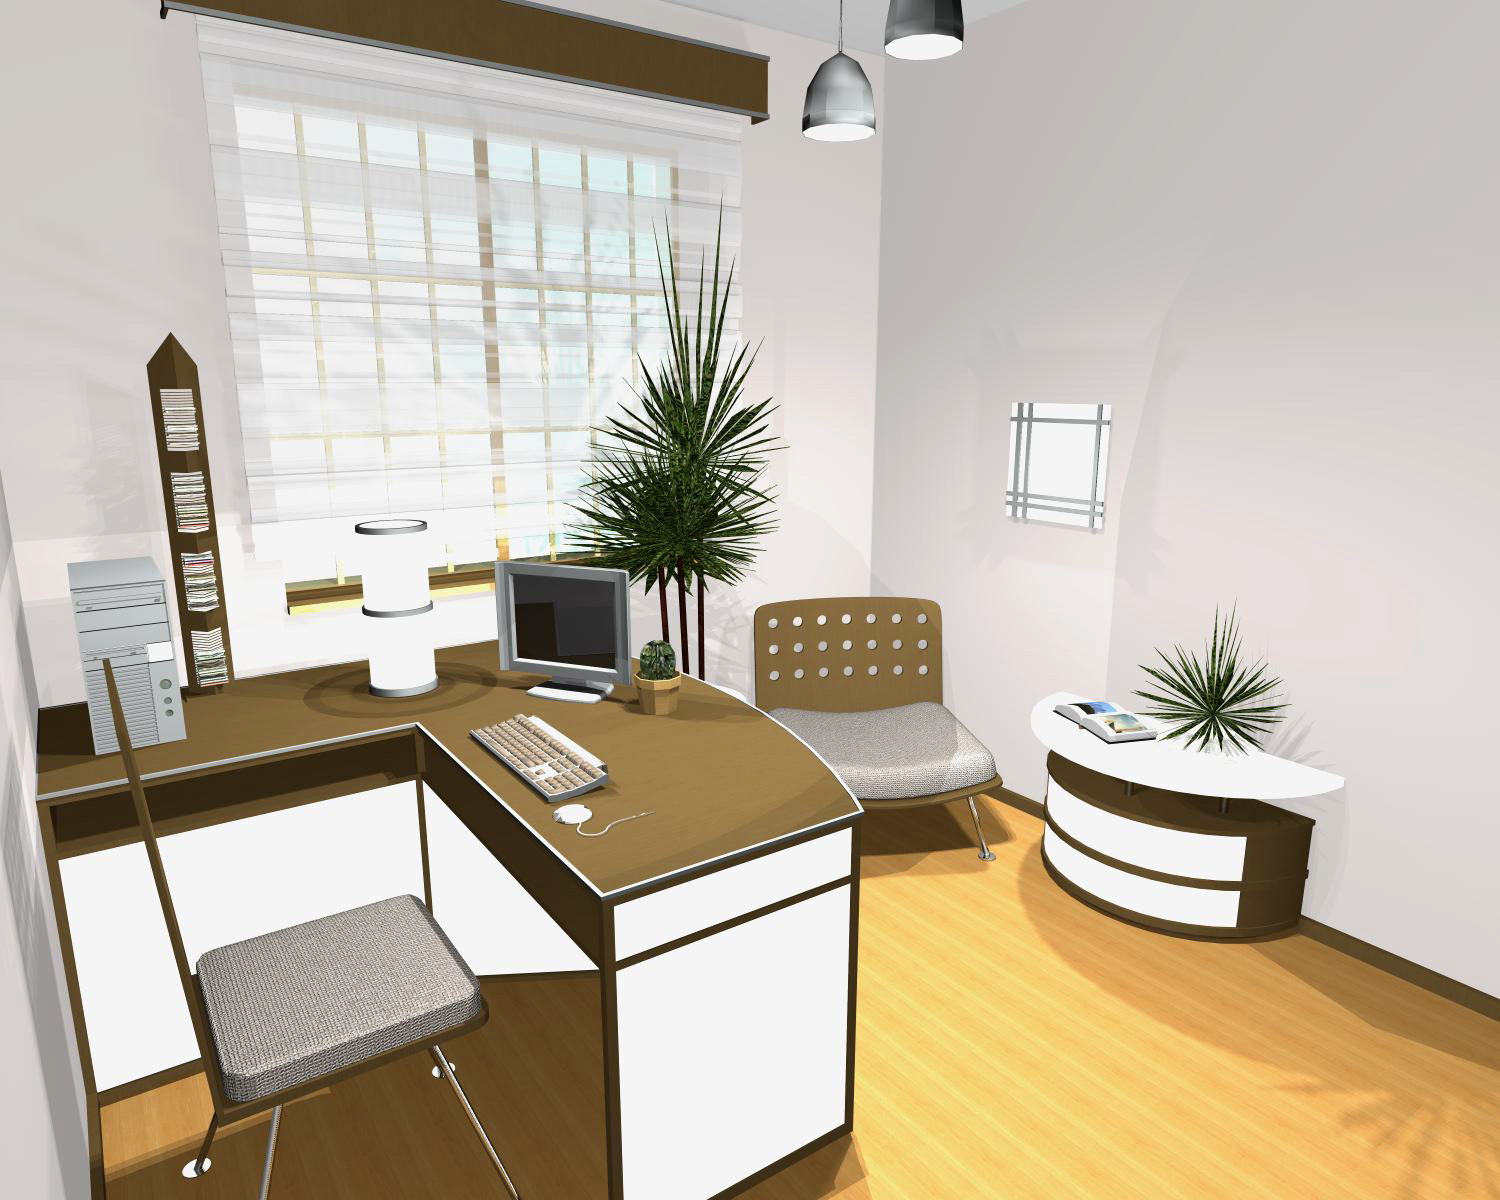 free download archicad furniture